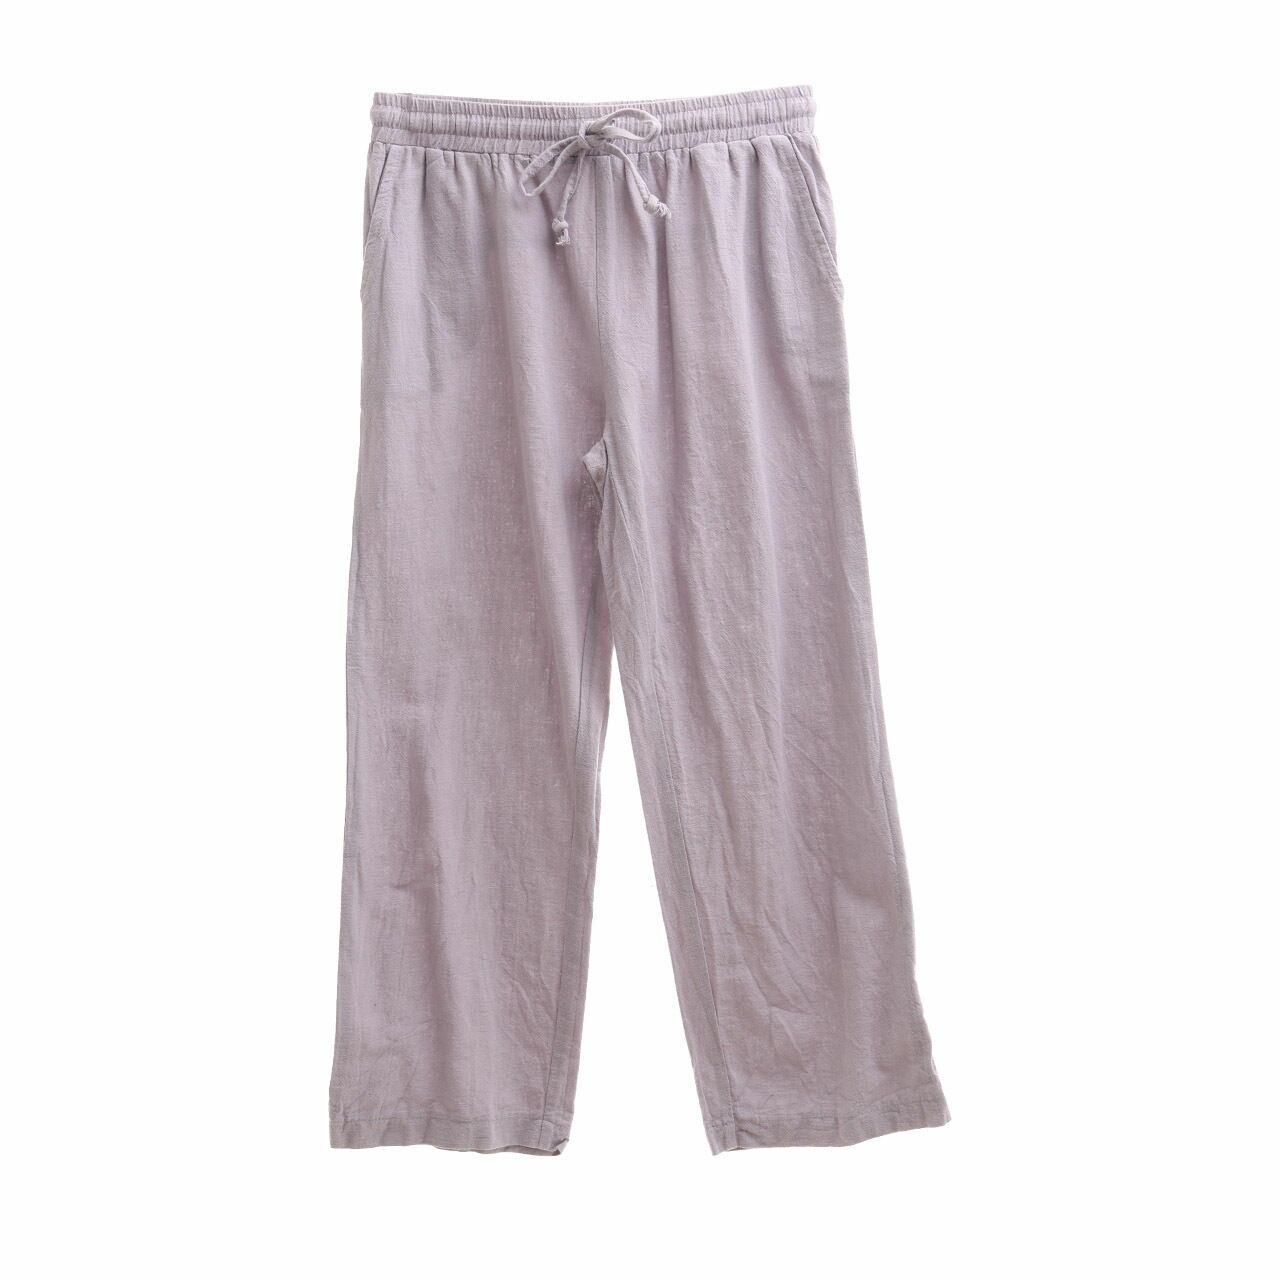 Beatrice Clothing Lilac Long Pants